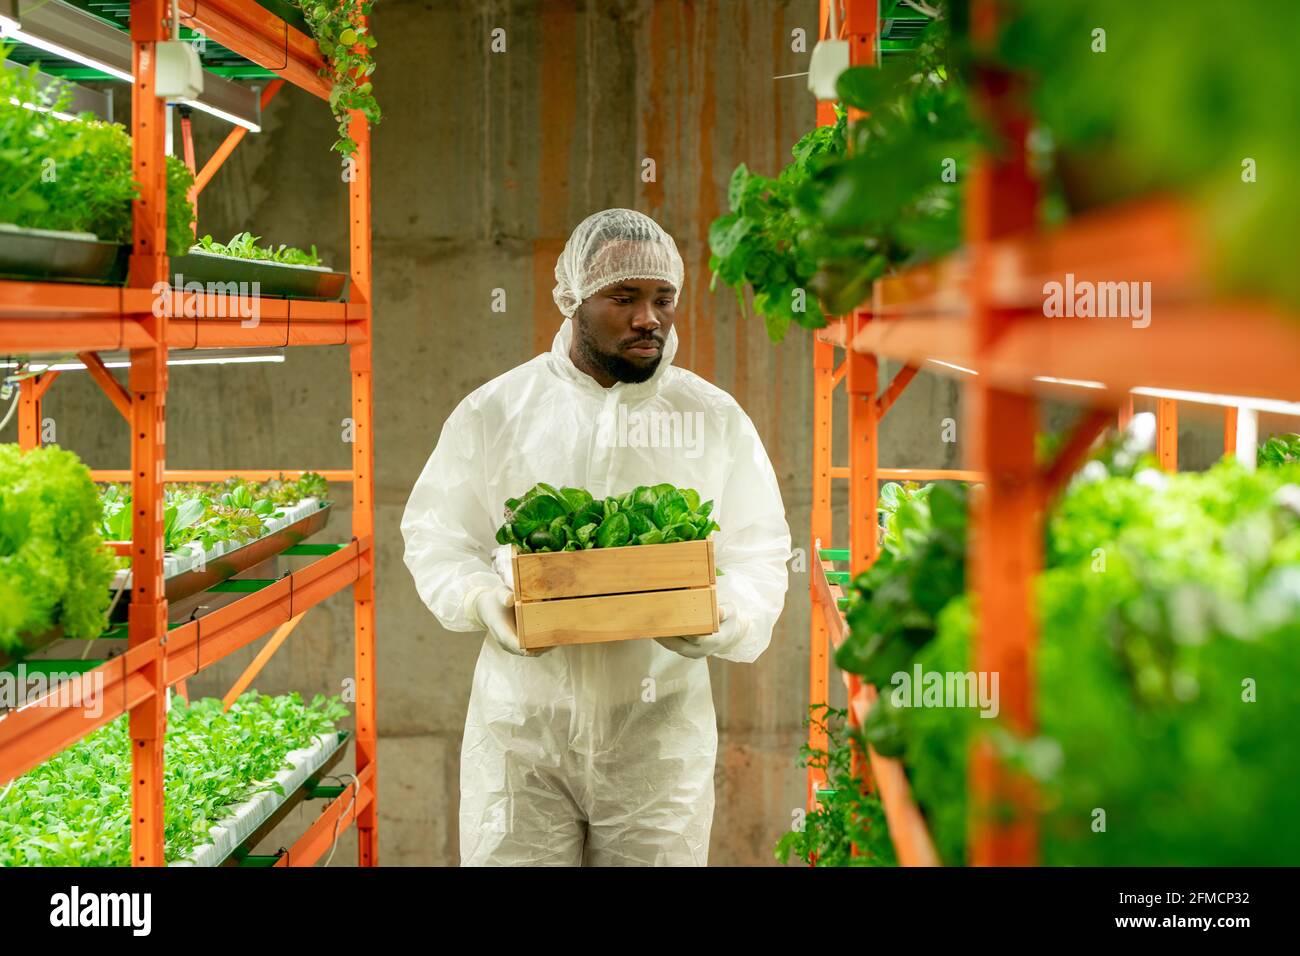 Serious young African American agroengineer in protective workwear carrying box of seedlings along vertical farming aisle Stock Photo